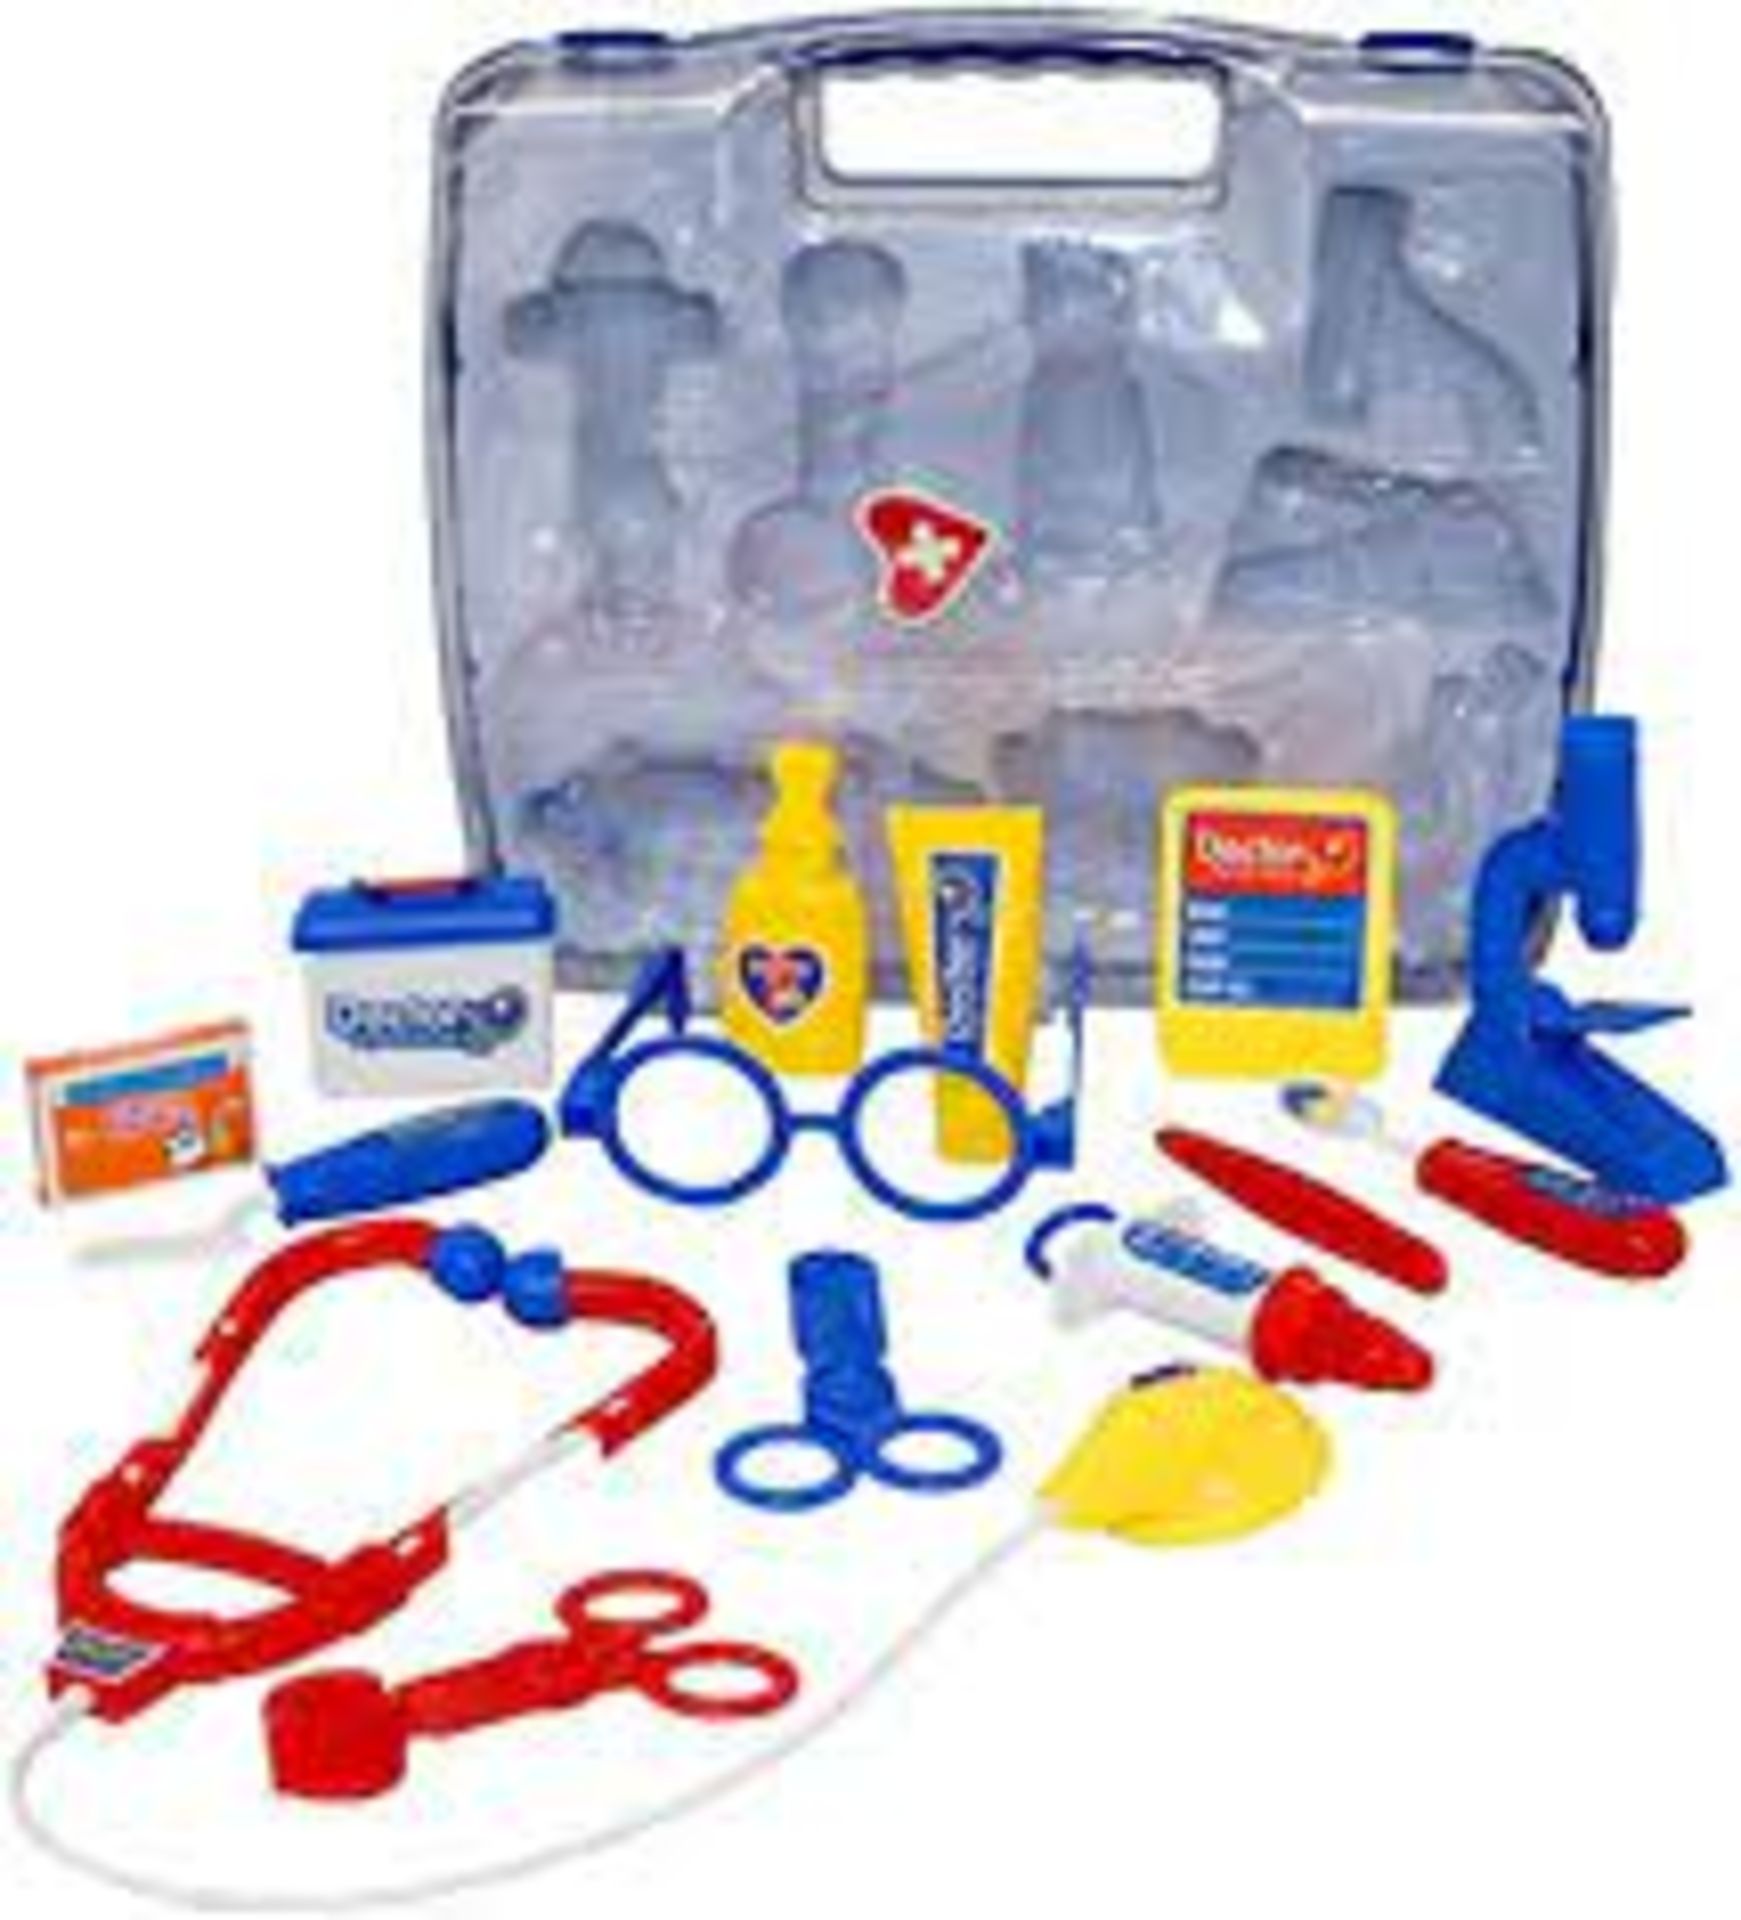 5 X BRAND NEW Blue Childrens Kids Role Play Doctor Nurses Toy Set Medical Kit (3622) R10-8